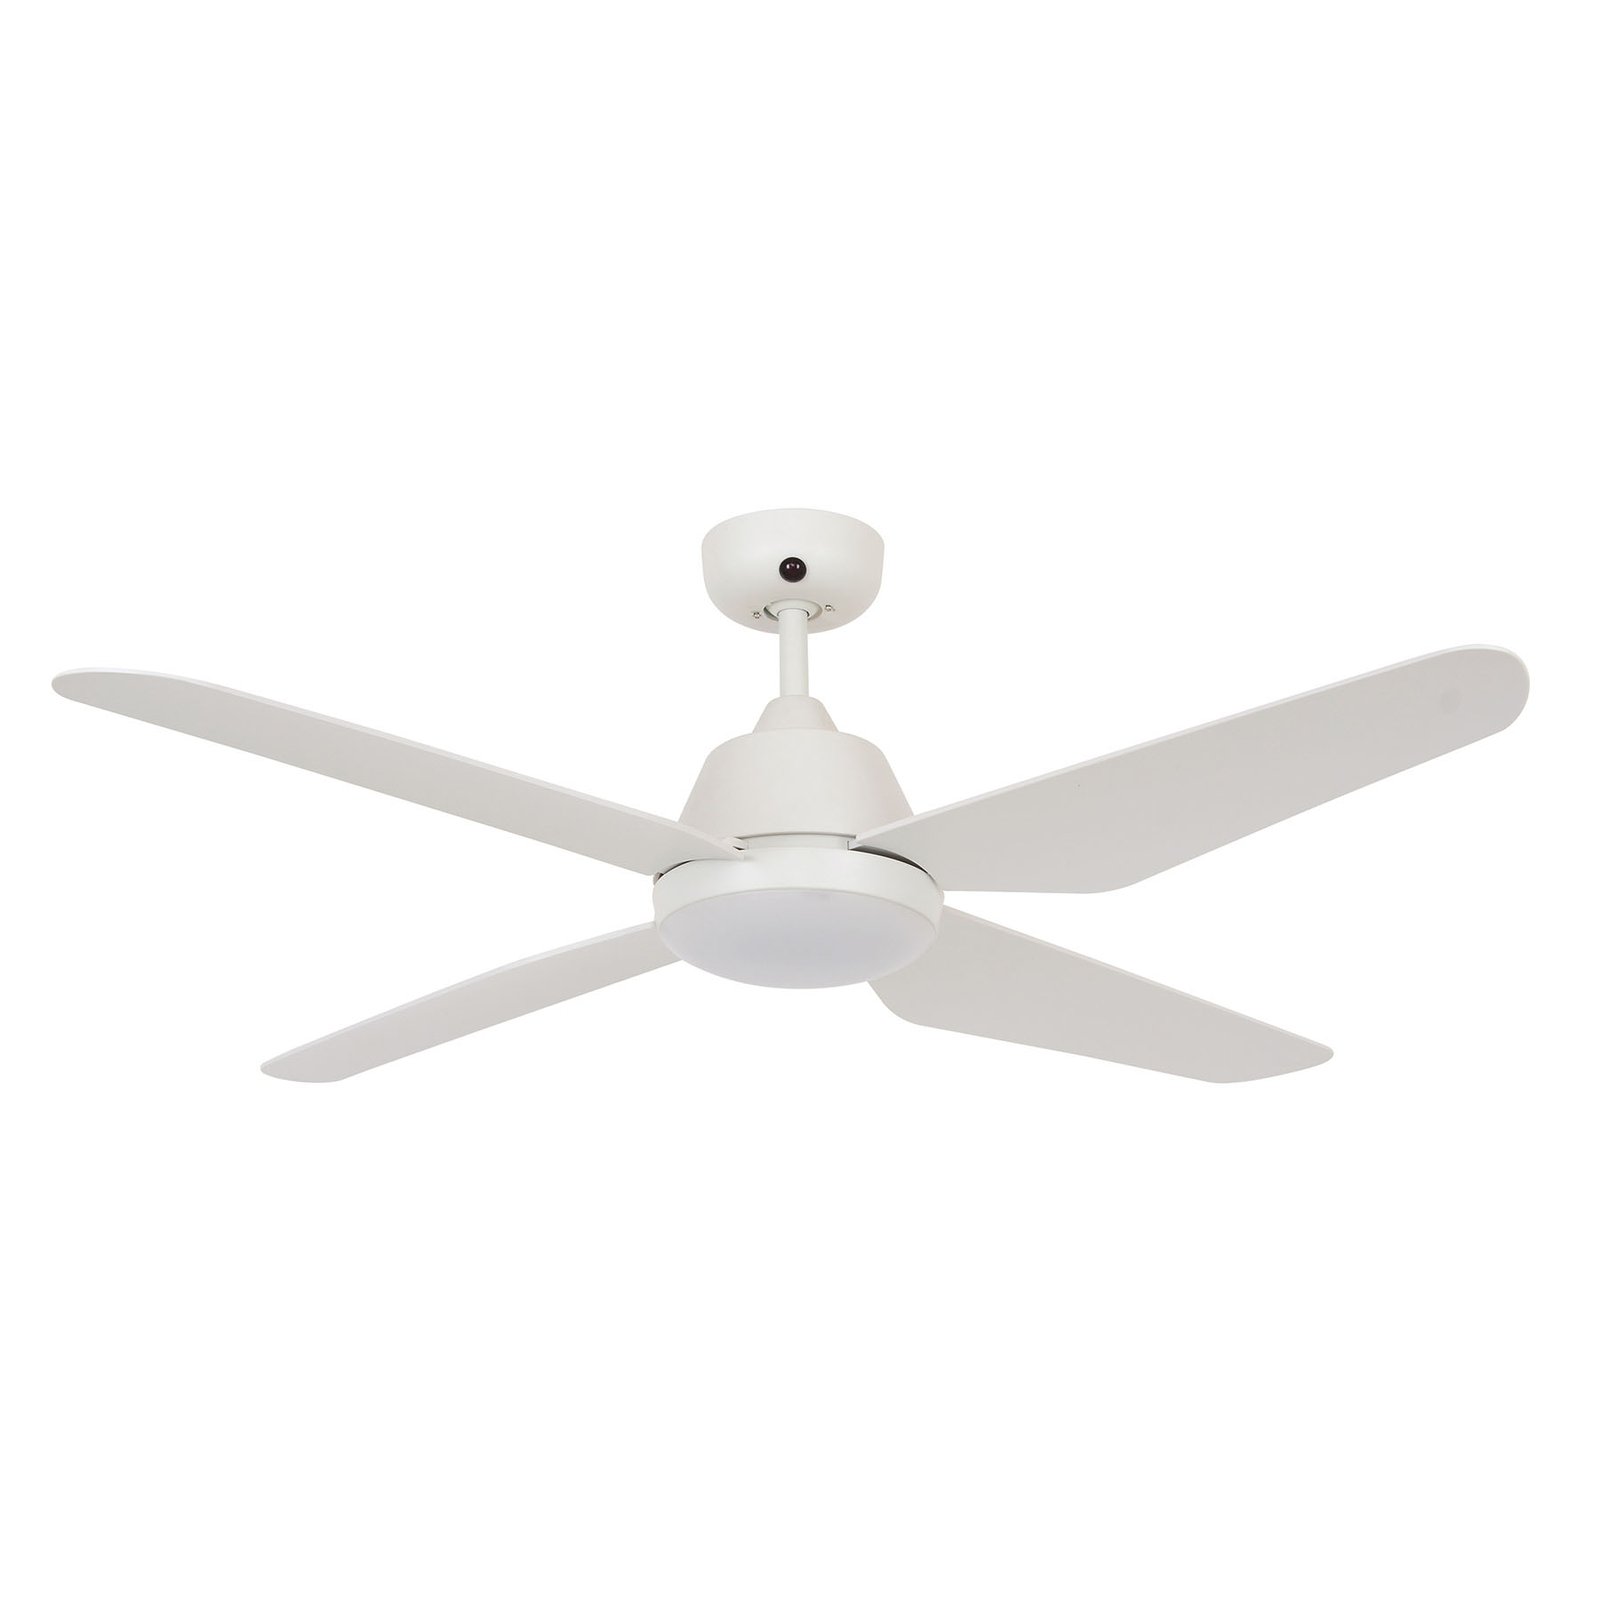 Aria ceiling fan with LED light, white